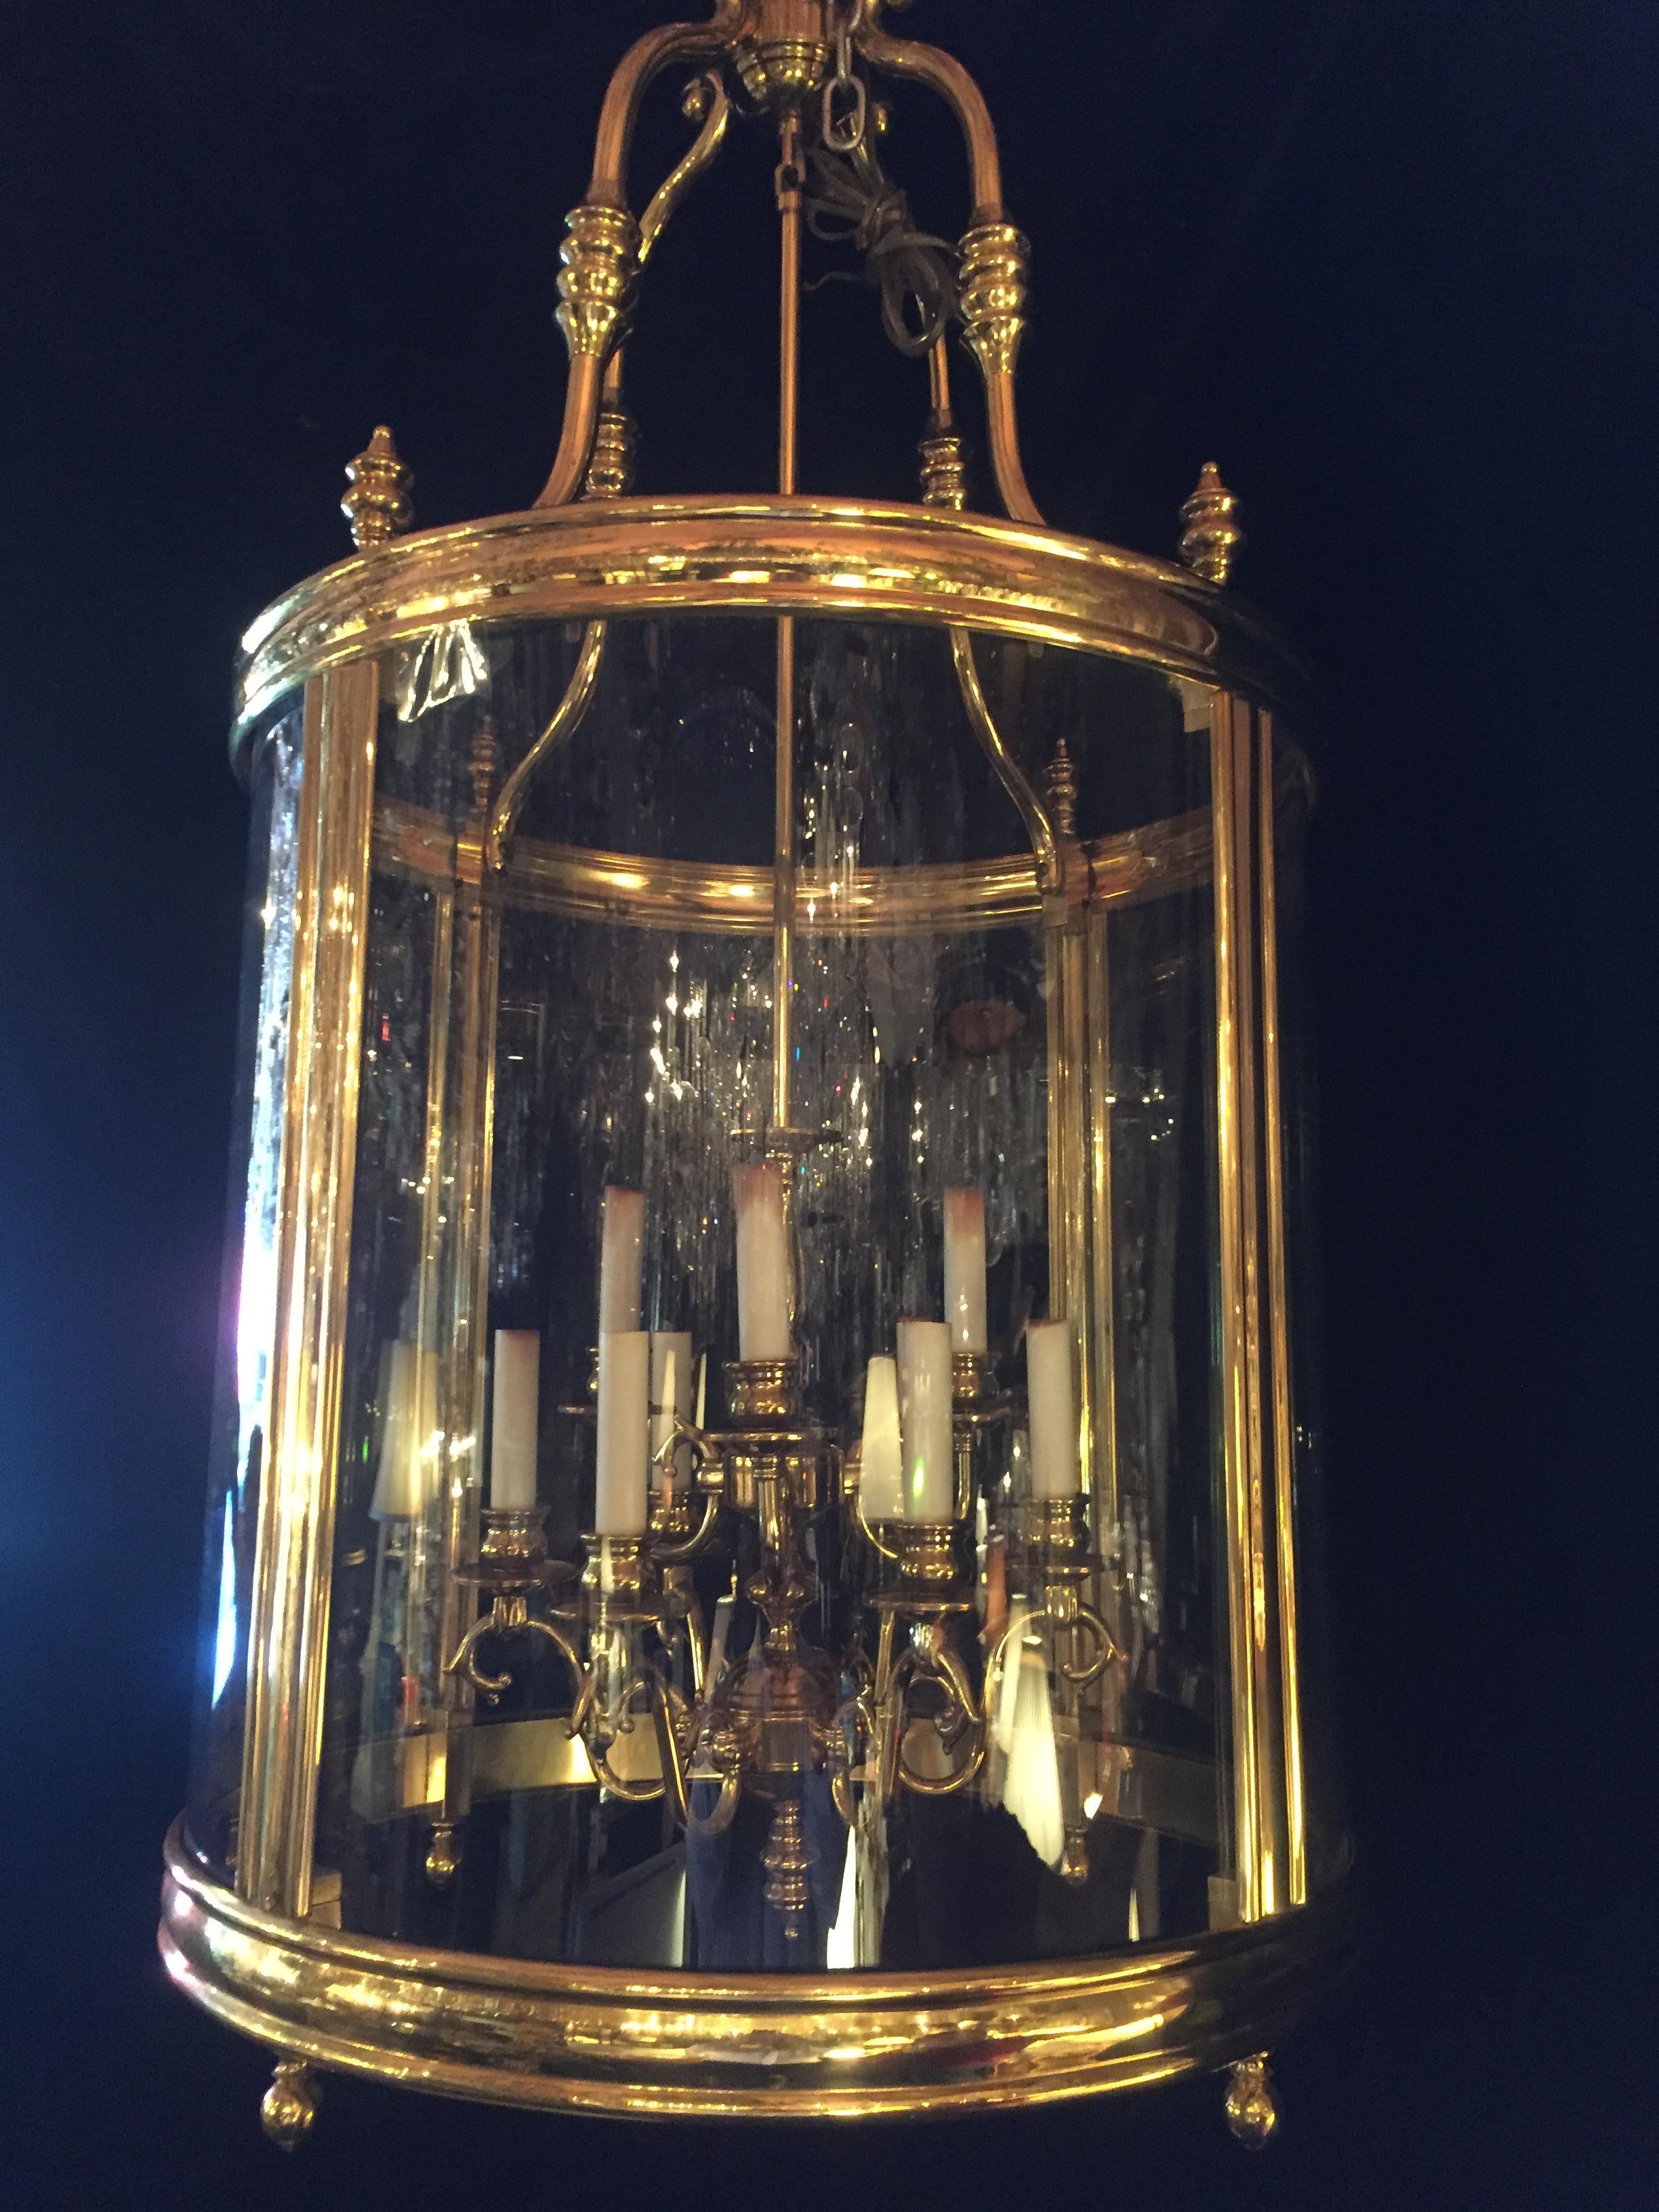 A large and massive fine French Louis XVI style gilt brass and curved glass multi light lantern chandelier.